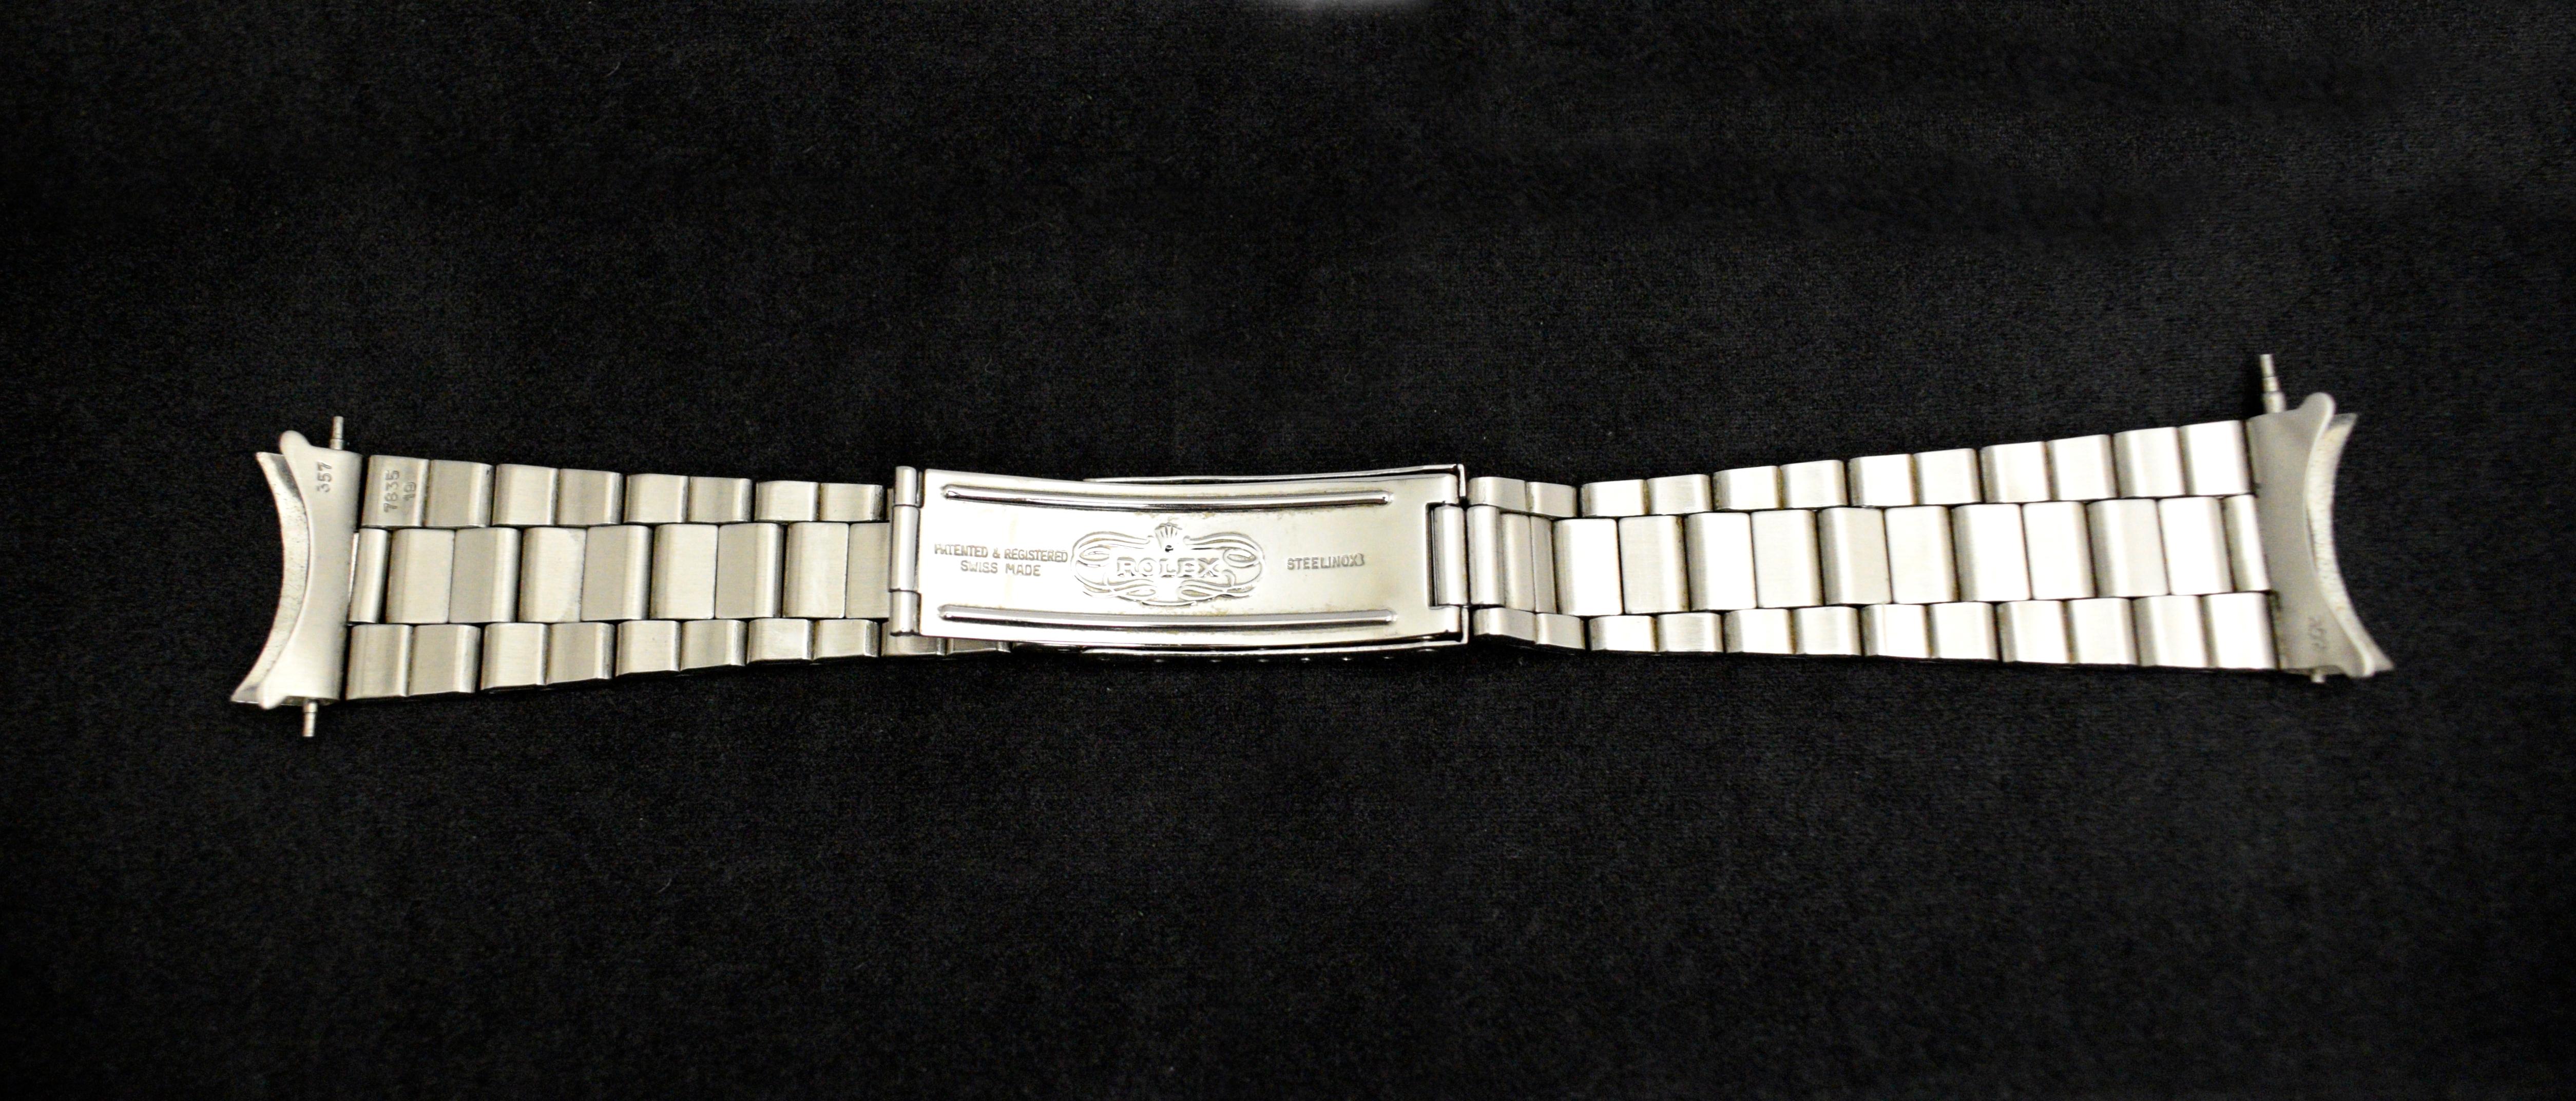 Rolex Oysterdate Precision Silver Dial Manual Wind 6694 Steel Watch, 1971 For Sale 5